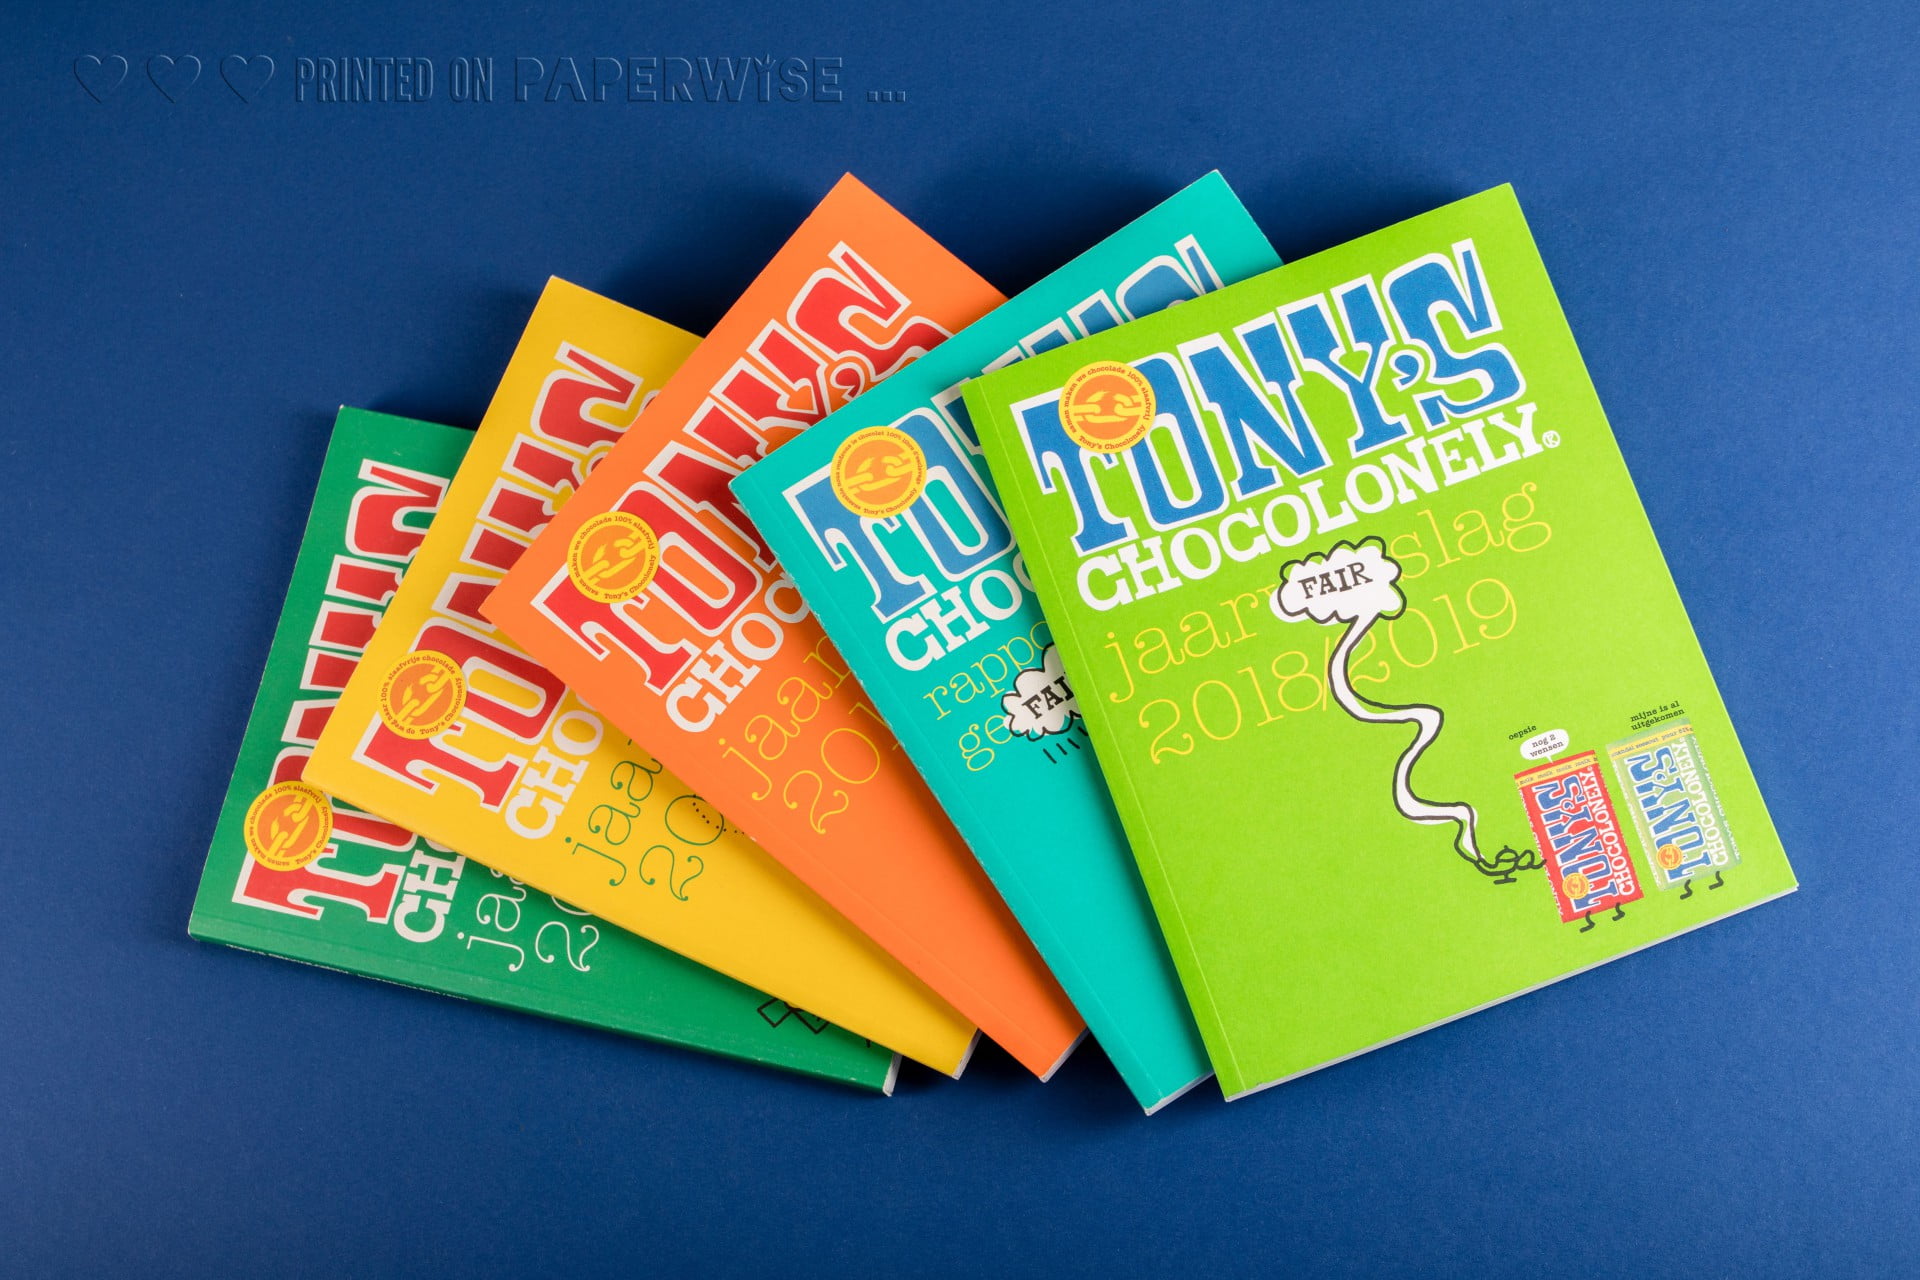 PaperWise sustainable paper annual report CSR eco friendy printing Tony'sChocolonely